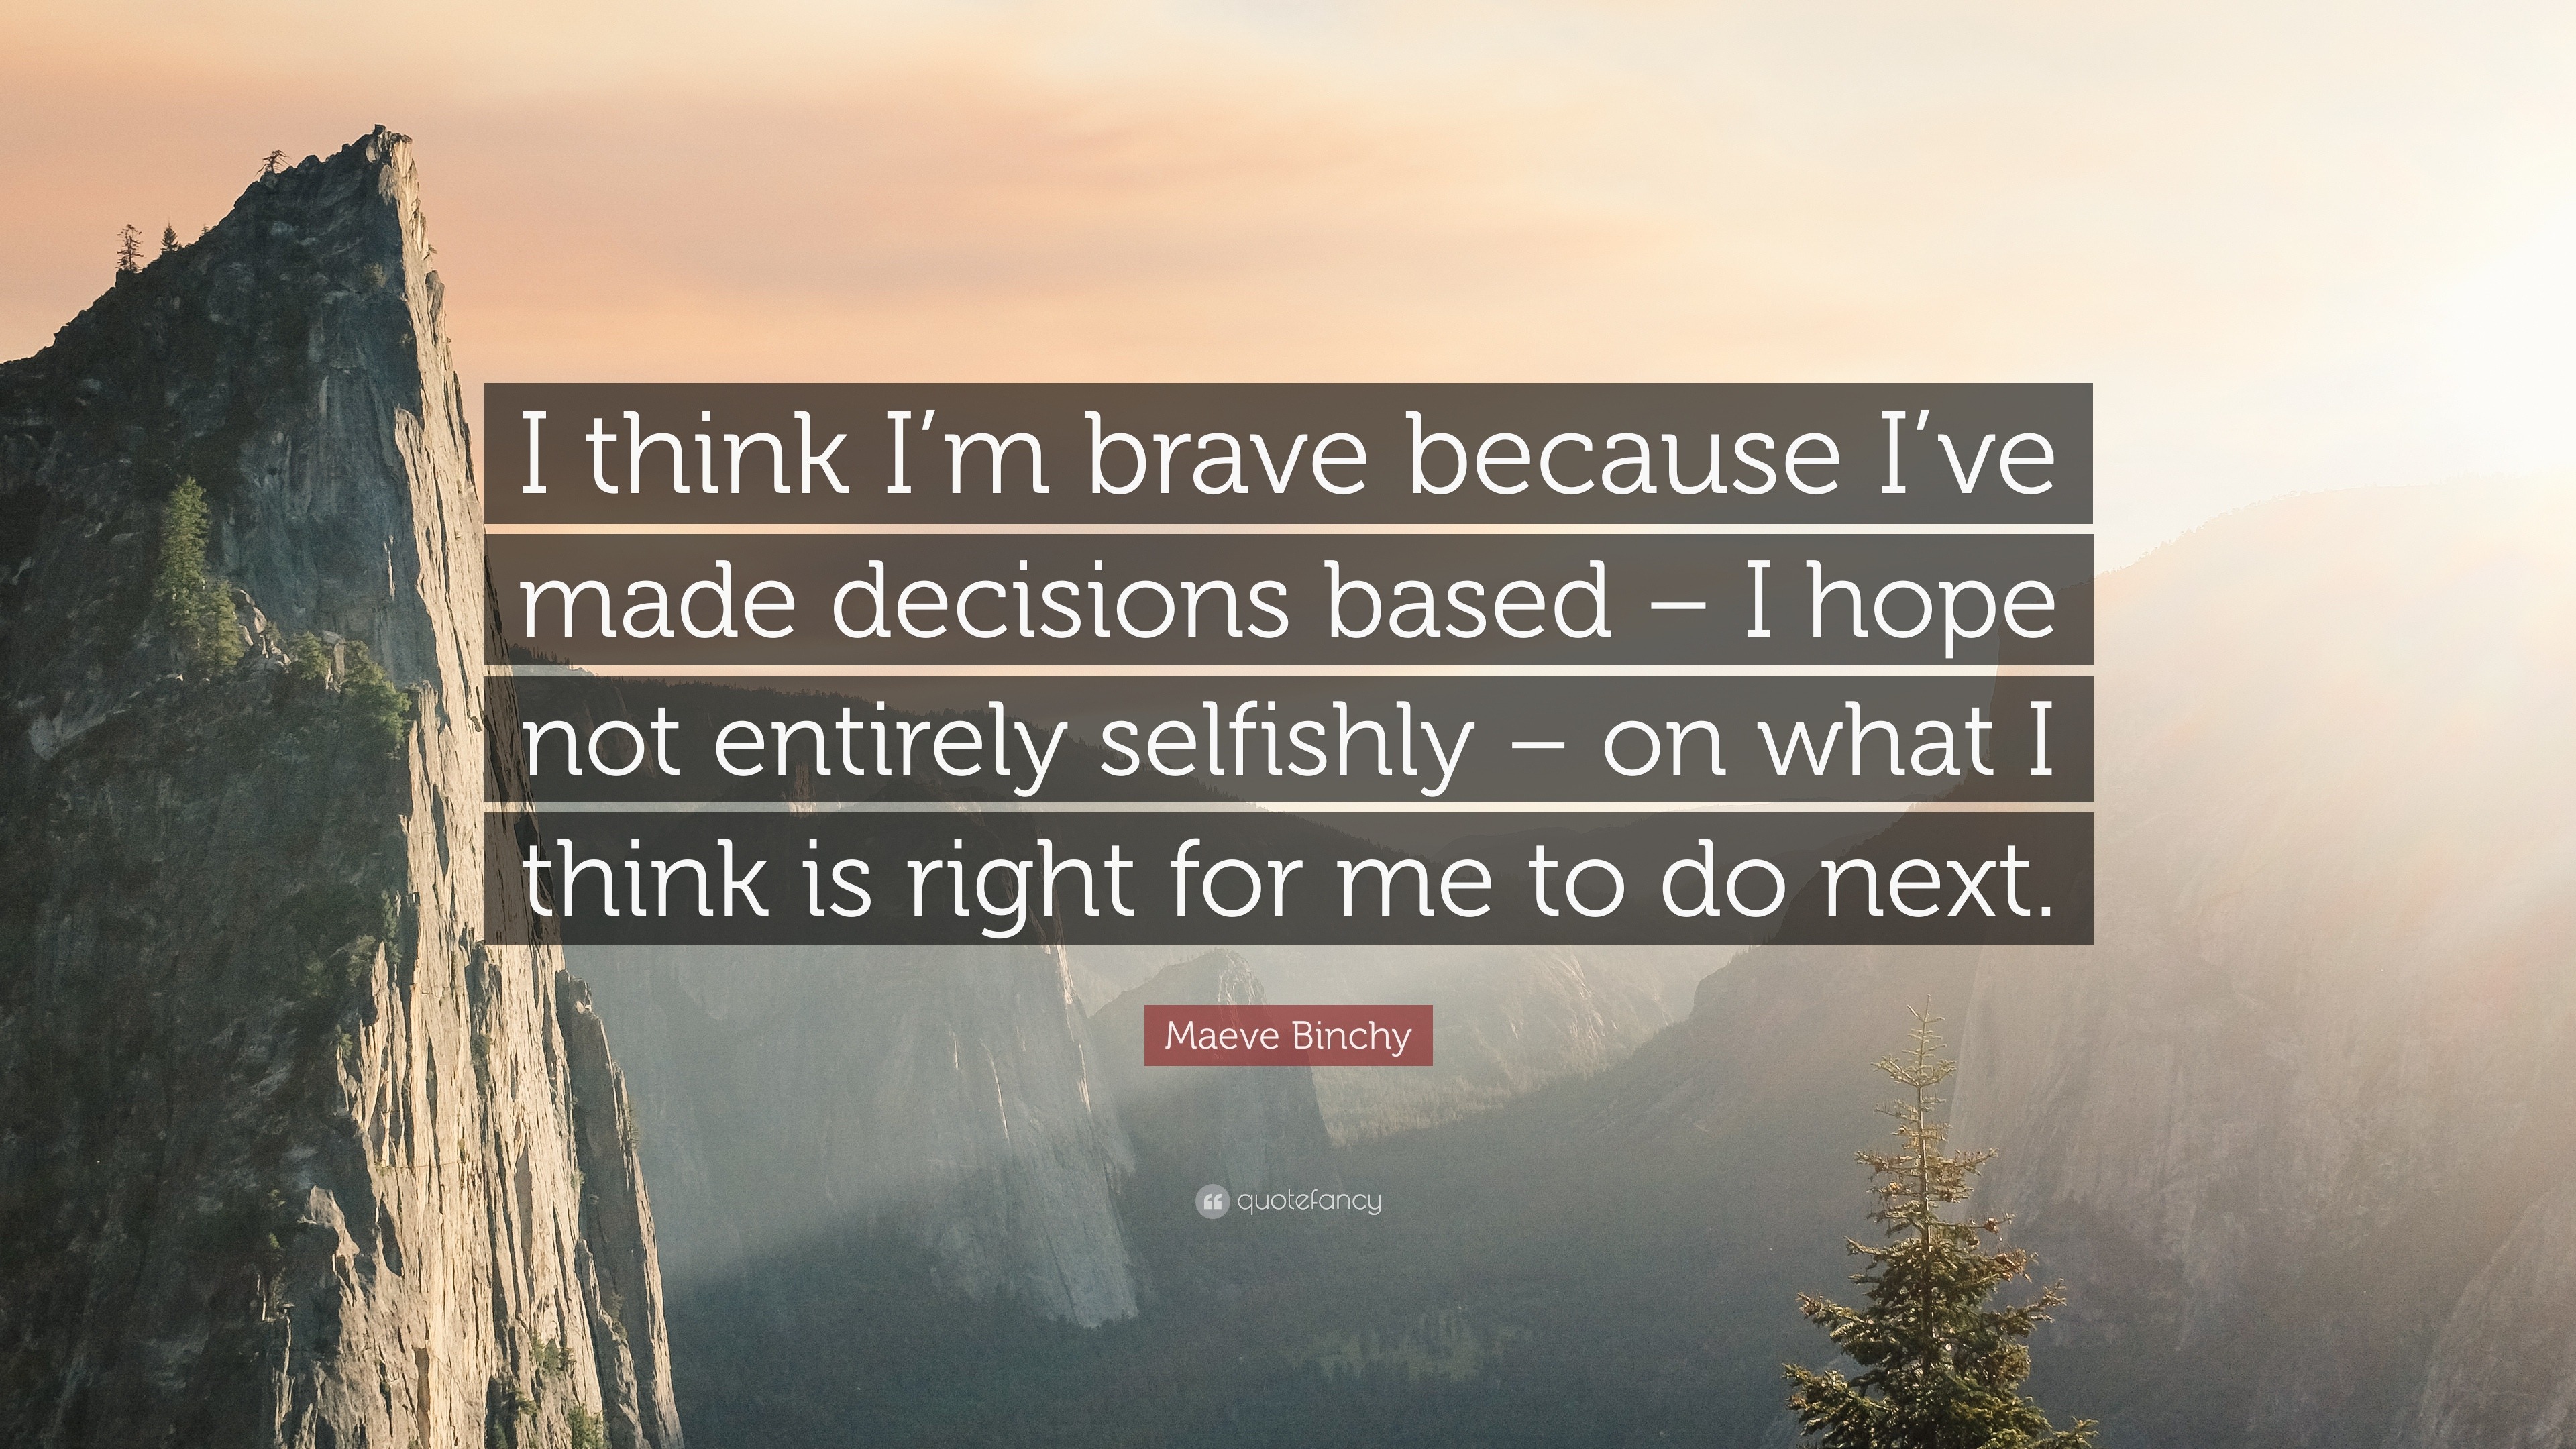 https://quotefancy.com/media/wallpaper/3840x2160/852699-Maeve-Binchy-Quote-I-think-I-m-brave-because-I-ve-made-decisions.jpg